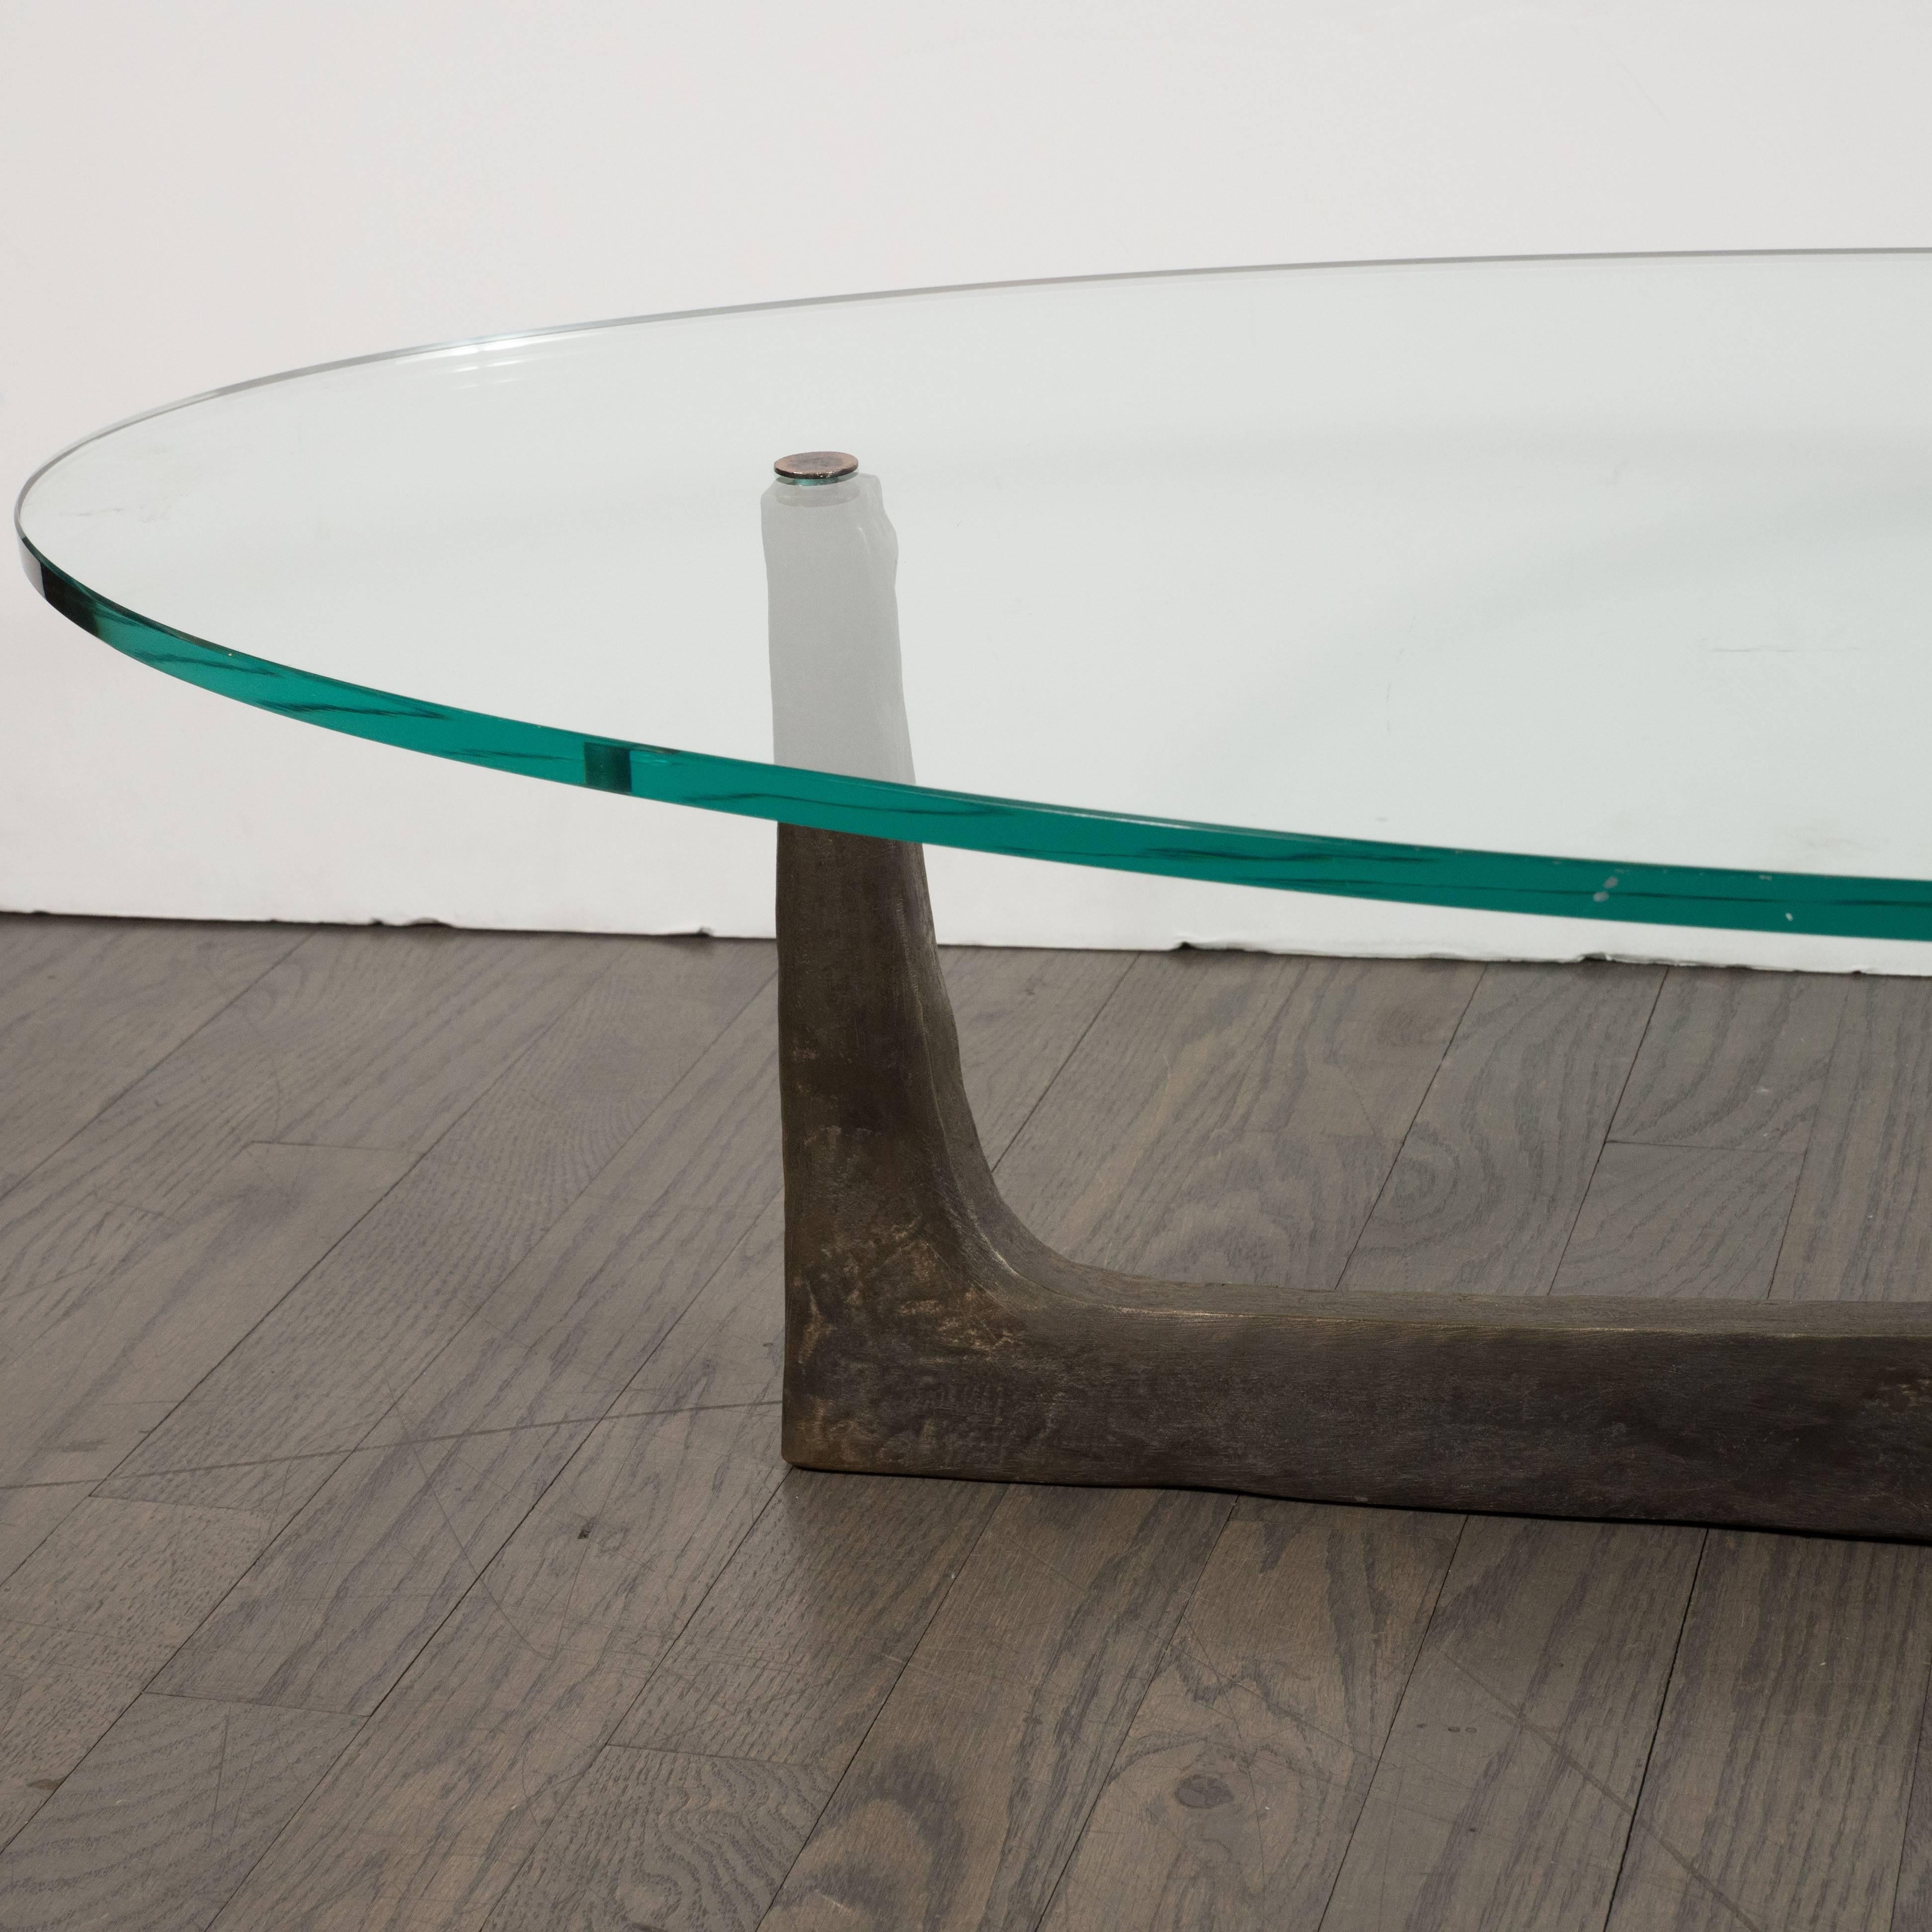 This graphic and sophisticated cocktail table was realized by the renowned artisan Felix Agostini, circa 1960. Suggesting the work of Isamu Noguchi, the piece features three tapered curvilinear arms in patinated bronze that support an oval plate